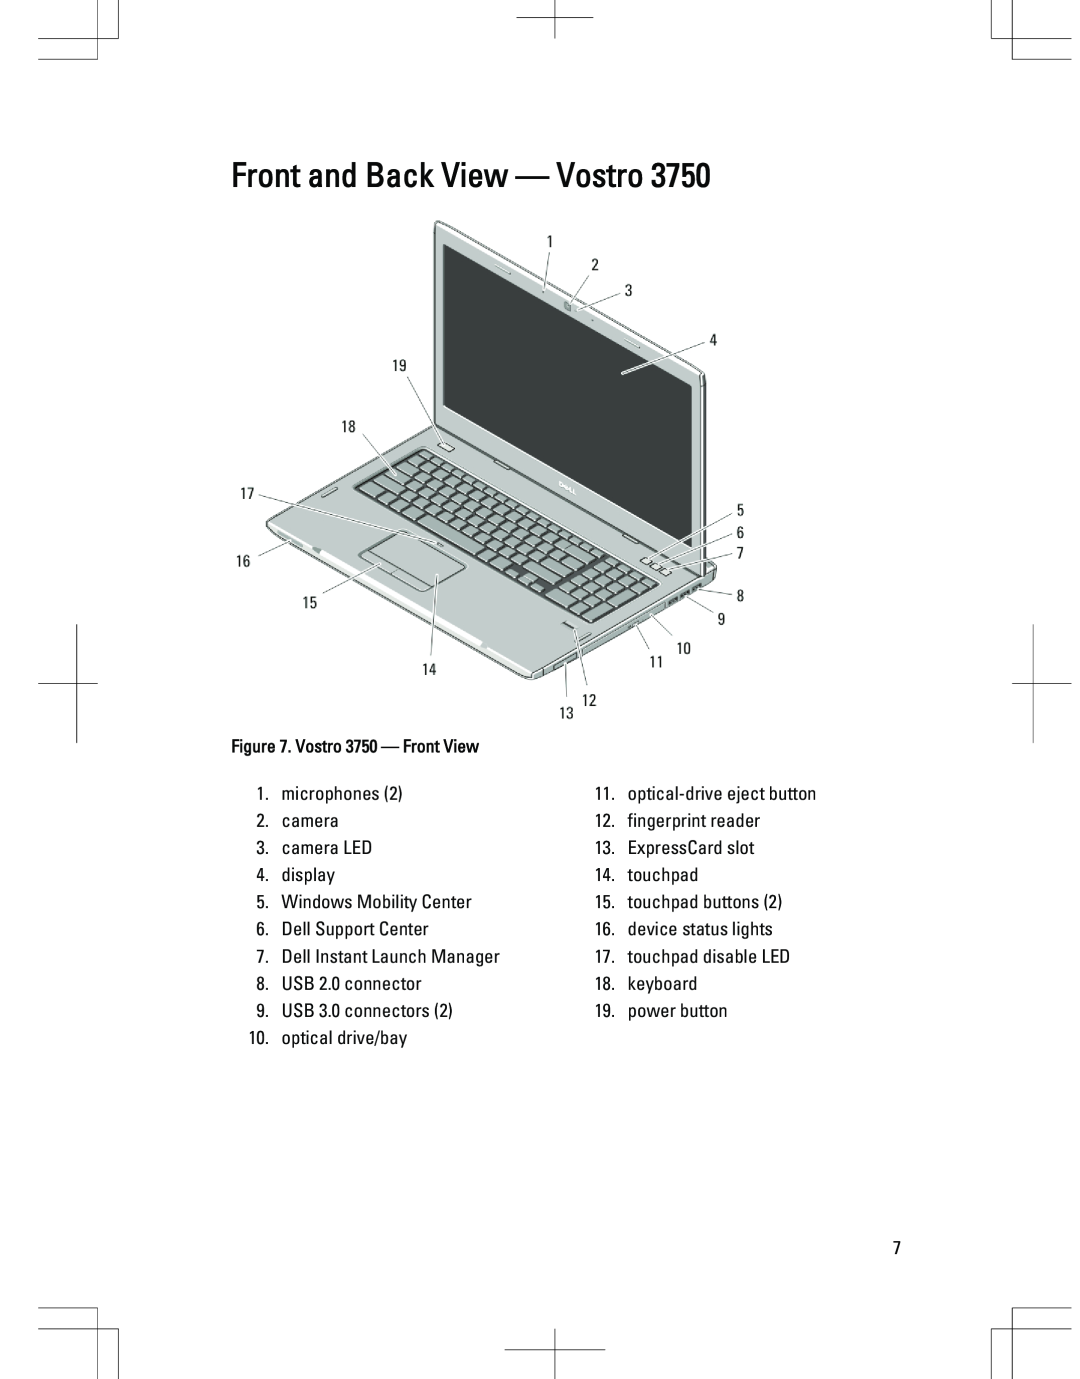 Dell 3550, 3555, 3350, 3450 manual Front and Back View - Vostro, Vostro 3750 - Front View 